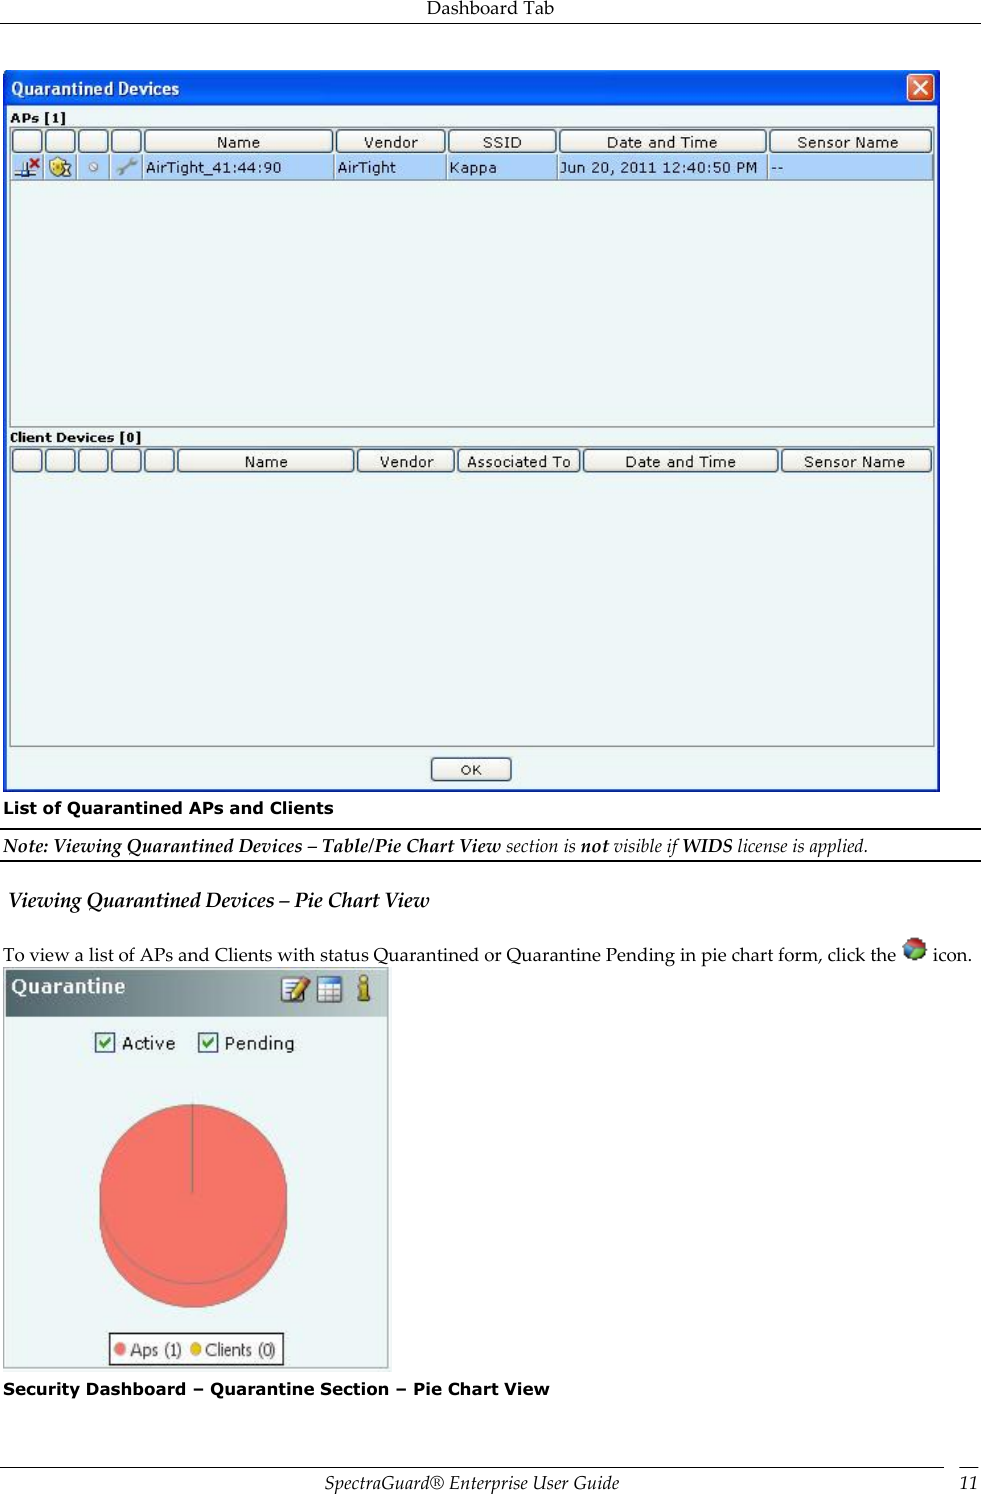 Dashboard Tab SpectraGuard®  Enterprise User Guide 11  List of Quarantined APs and Clients Note: Viewing Quarantined Devices – Table/Pie Chart View section is not visible if WIDS license is applied.  Viewing Quarantined Devices – Pie Chart View To view a list of APs and Clients with status Quarantined or Quarantine Pending in pie chart form, click the   icon.  Security Dashboard – Quarantine Section – Pie Chart View 